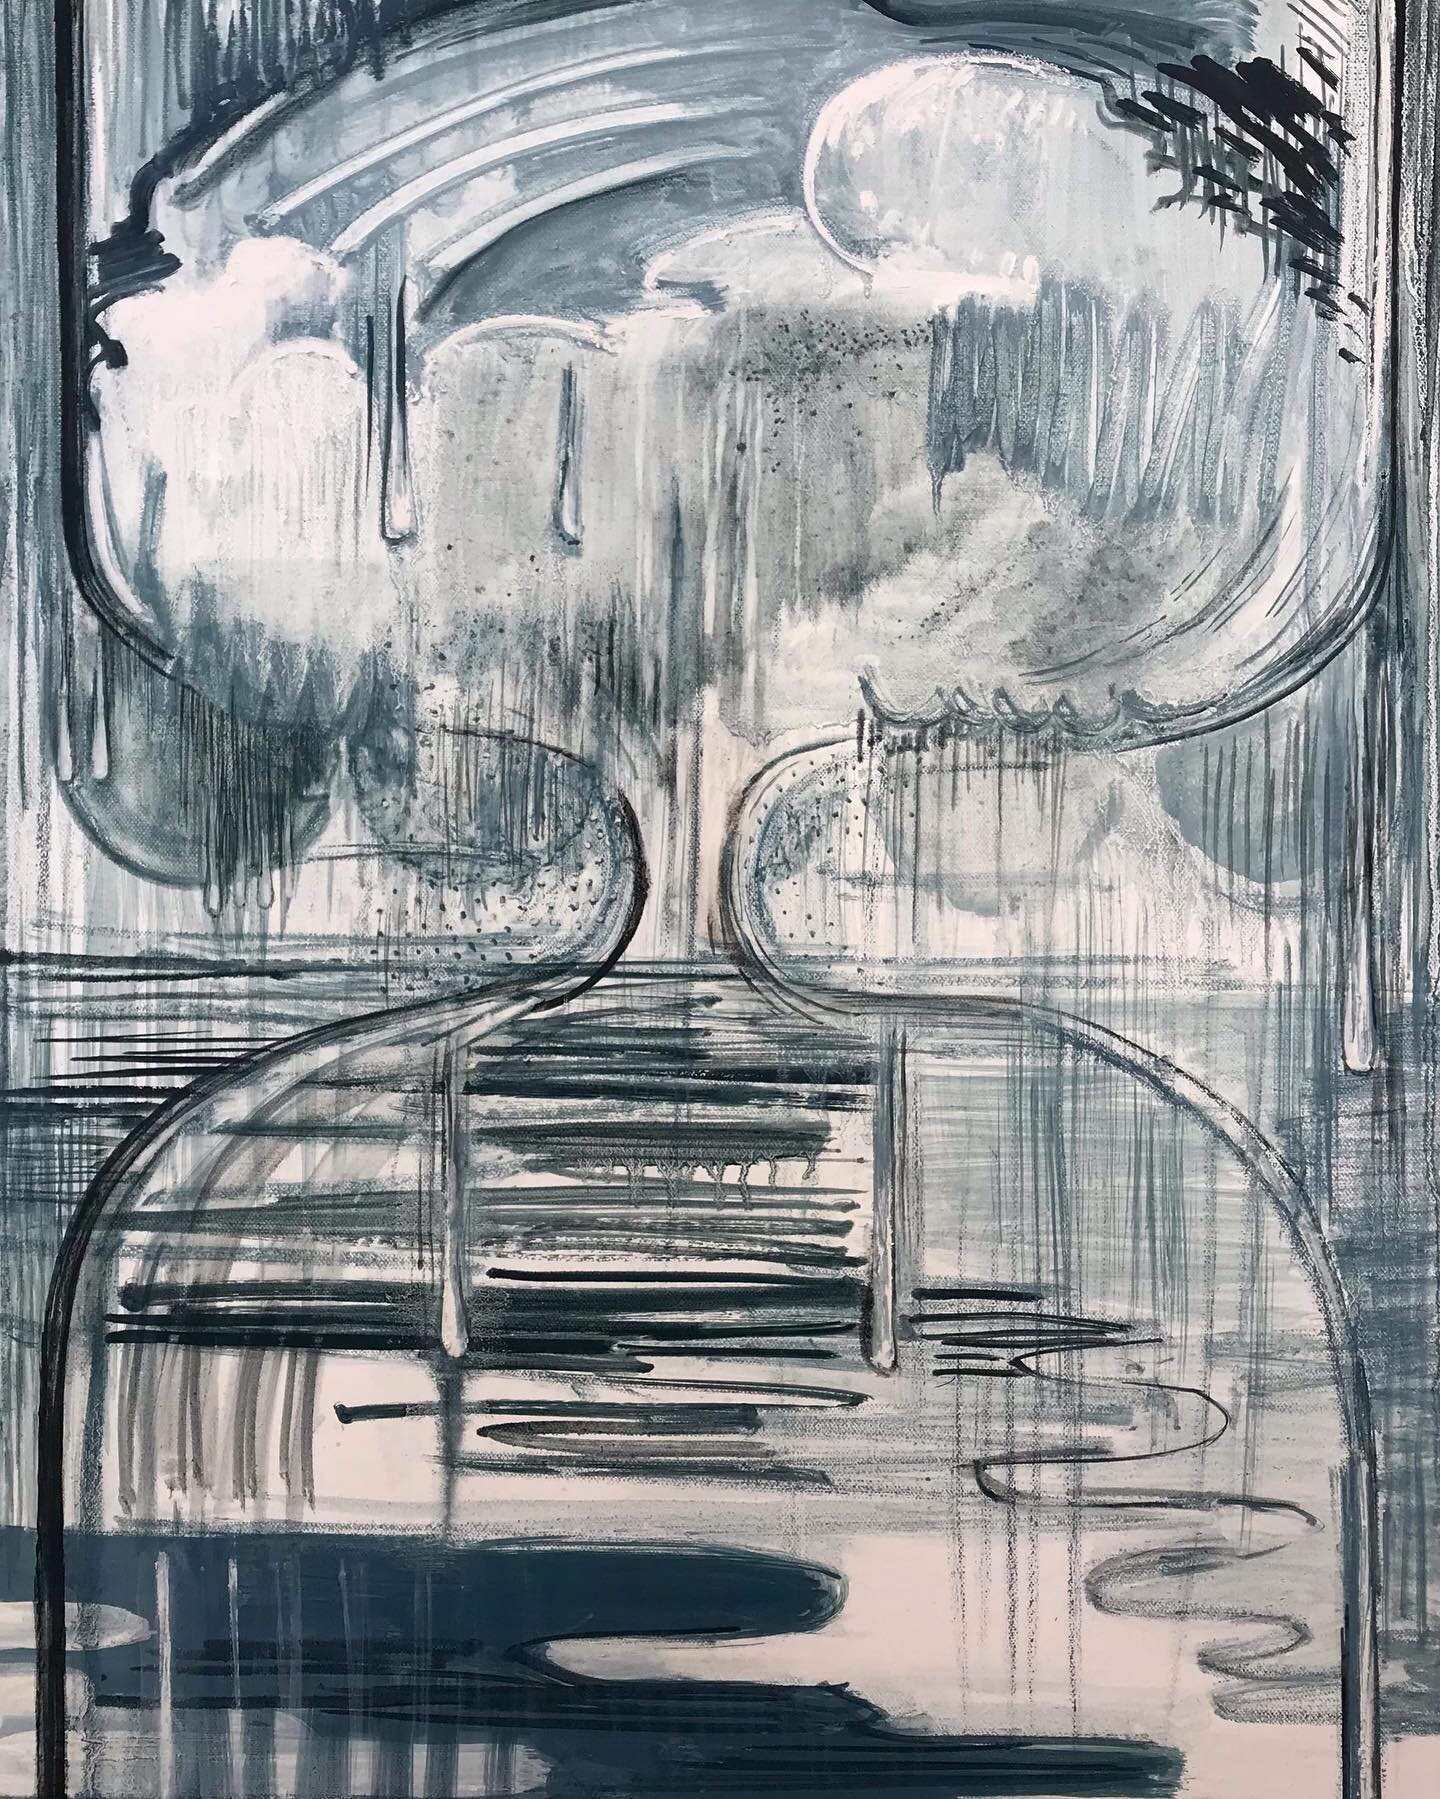 Another little grisaille... thanks to @unoeuf for the visit and conversation that catalyzed this foray into gray and thanks to Jasper Johns whom I&rsquo;m always thinking about...
Raincloud in a Bottle, 2021
oil, enamel, canvas, 20&rdquo; x 16&rdquo;